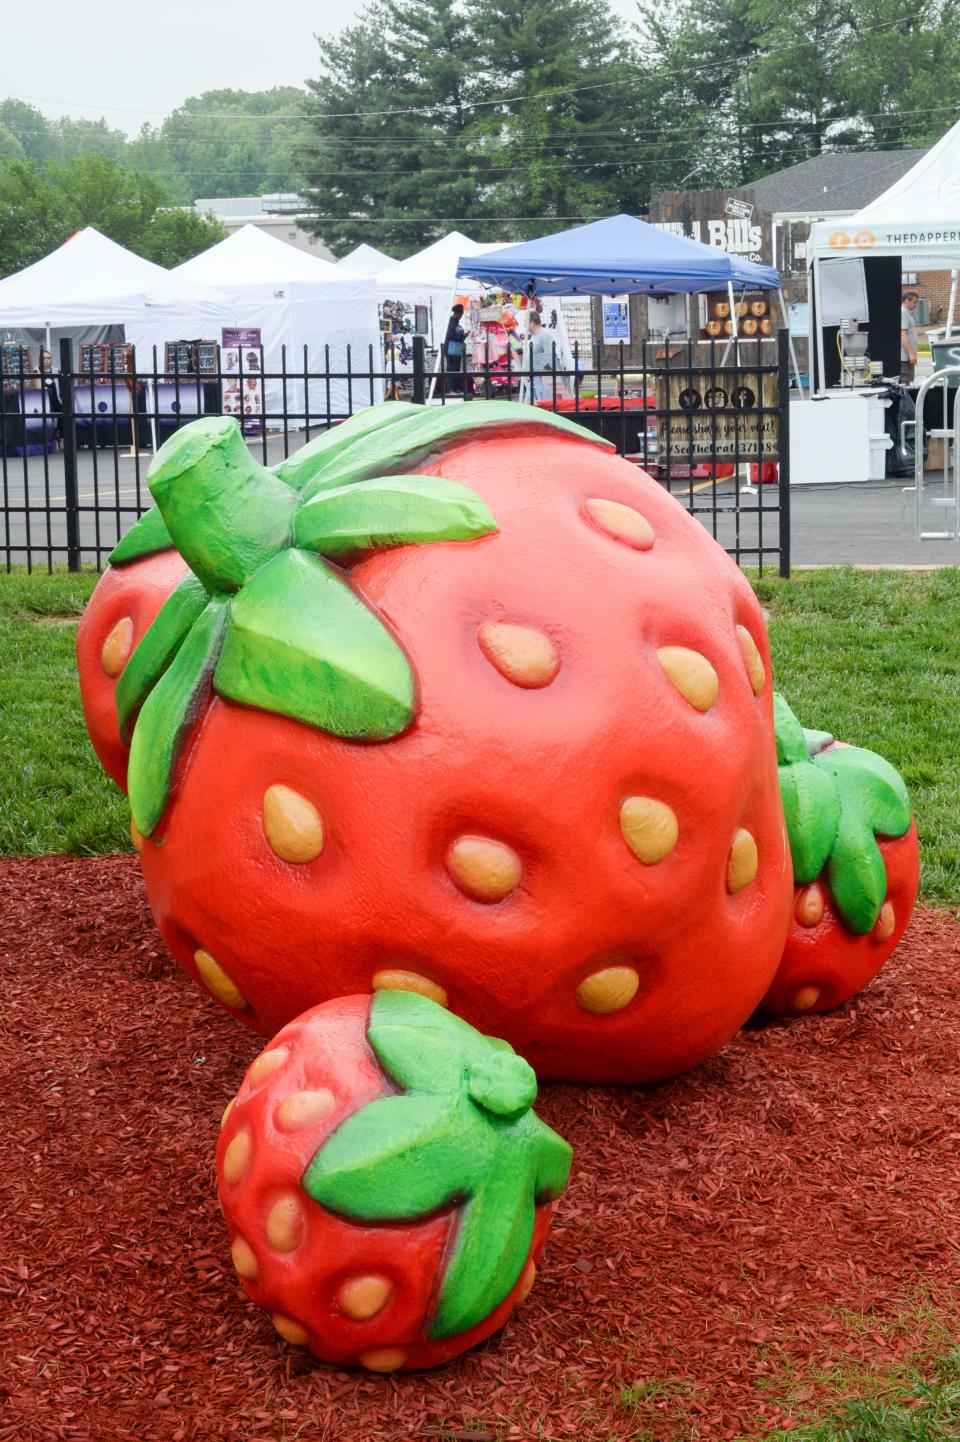 Giant strawberries enhance the landscape during the 78th Annual Middle Tennessee Strawberry Festival presented by the Portland Chamber of Commerce in Portland on Saturday, May 11.